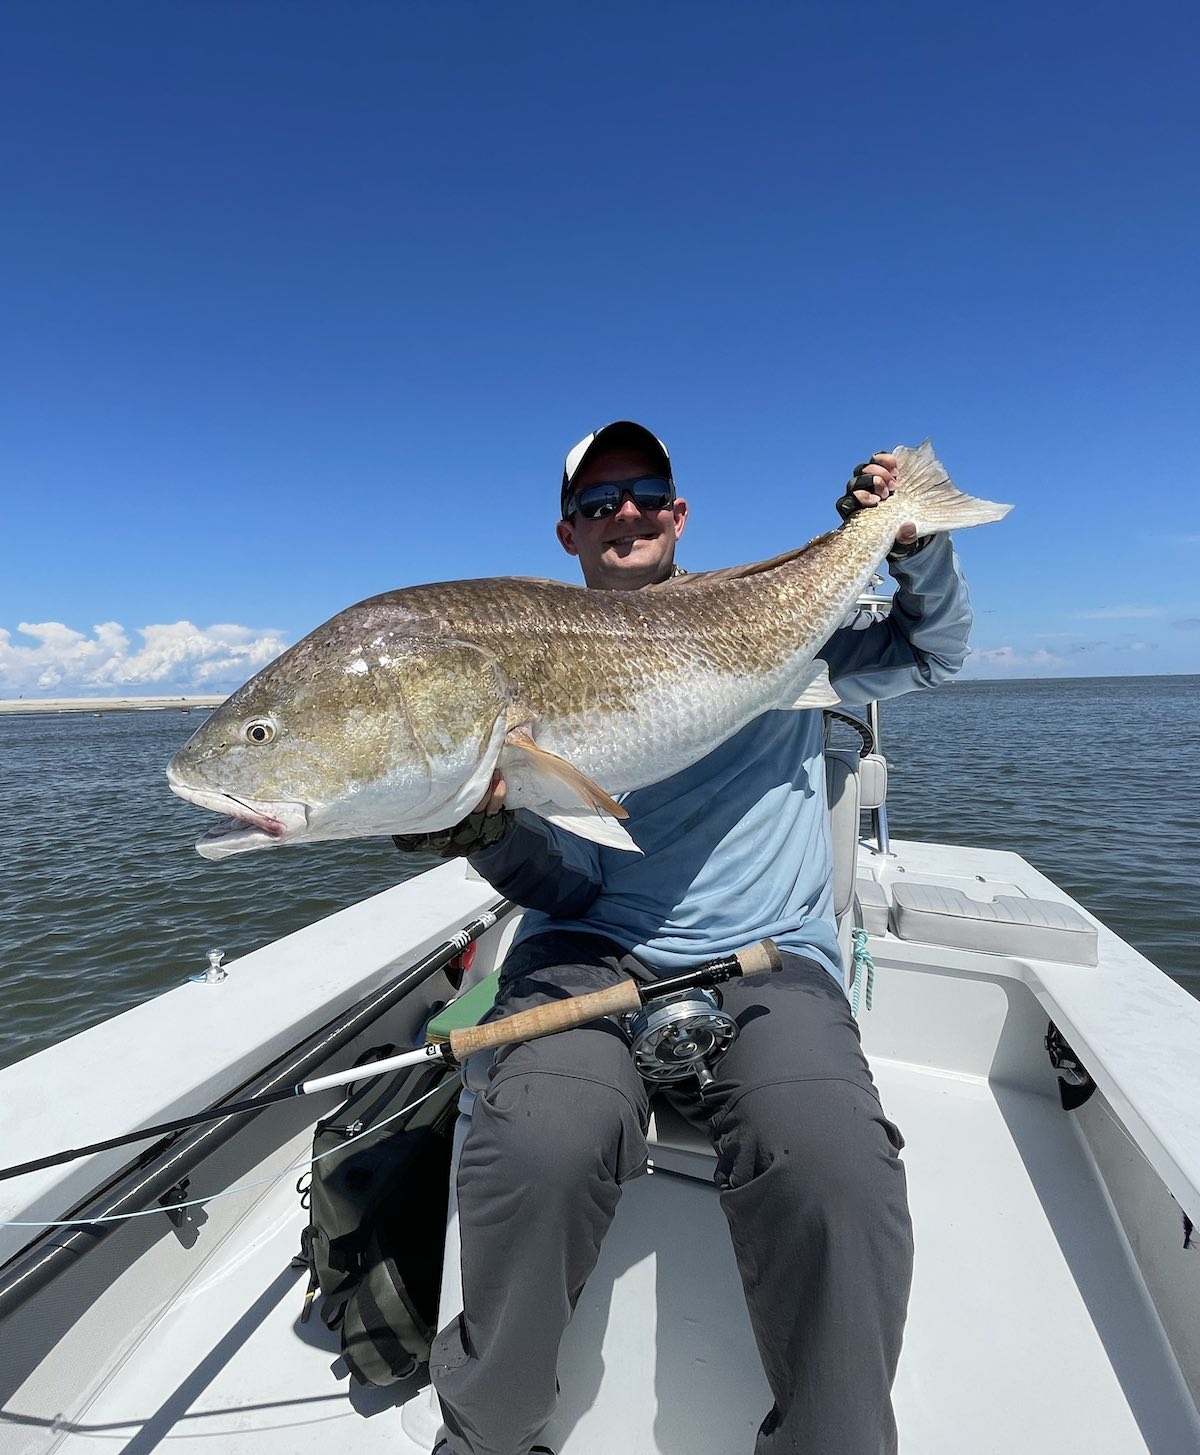 Giant redfish caught with fly rod in Louisiana